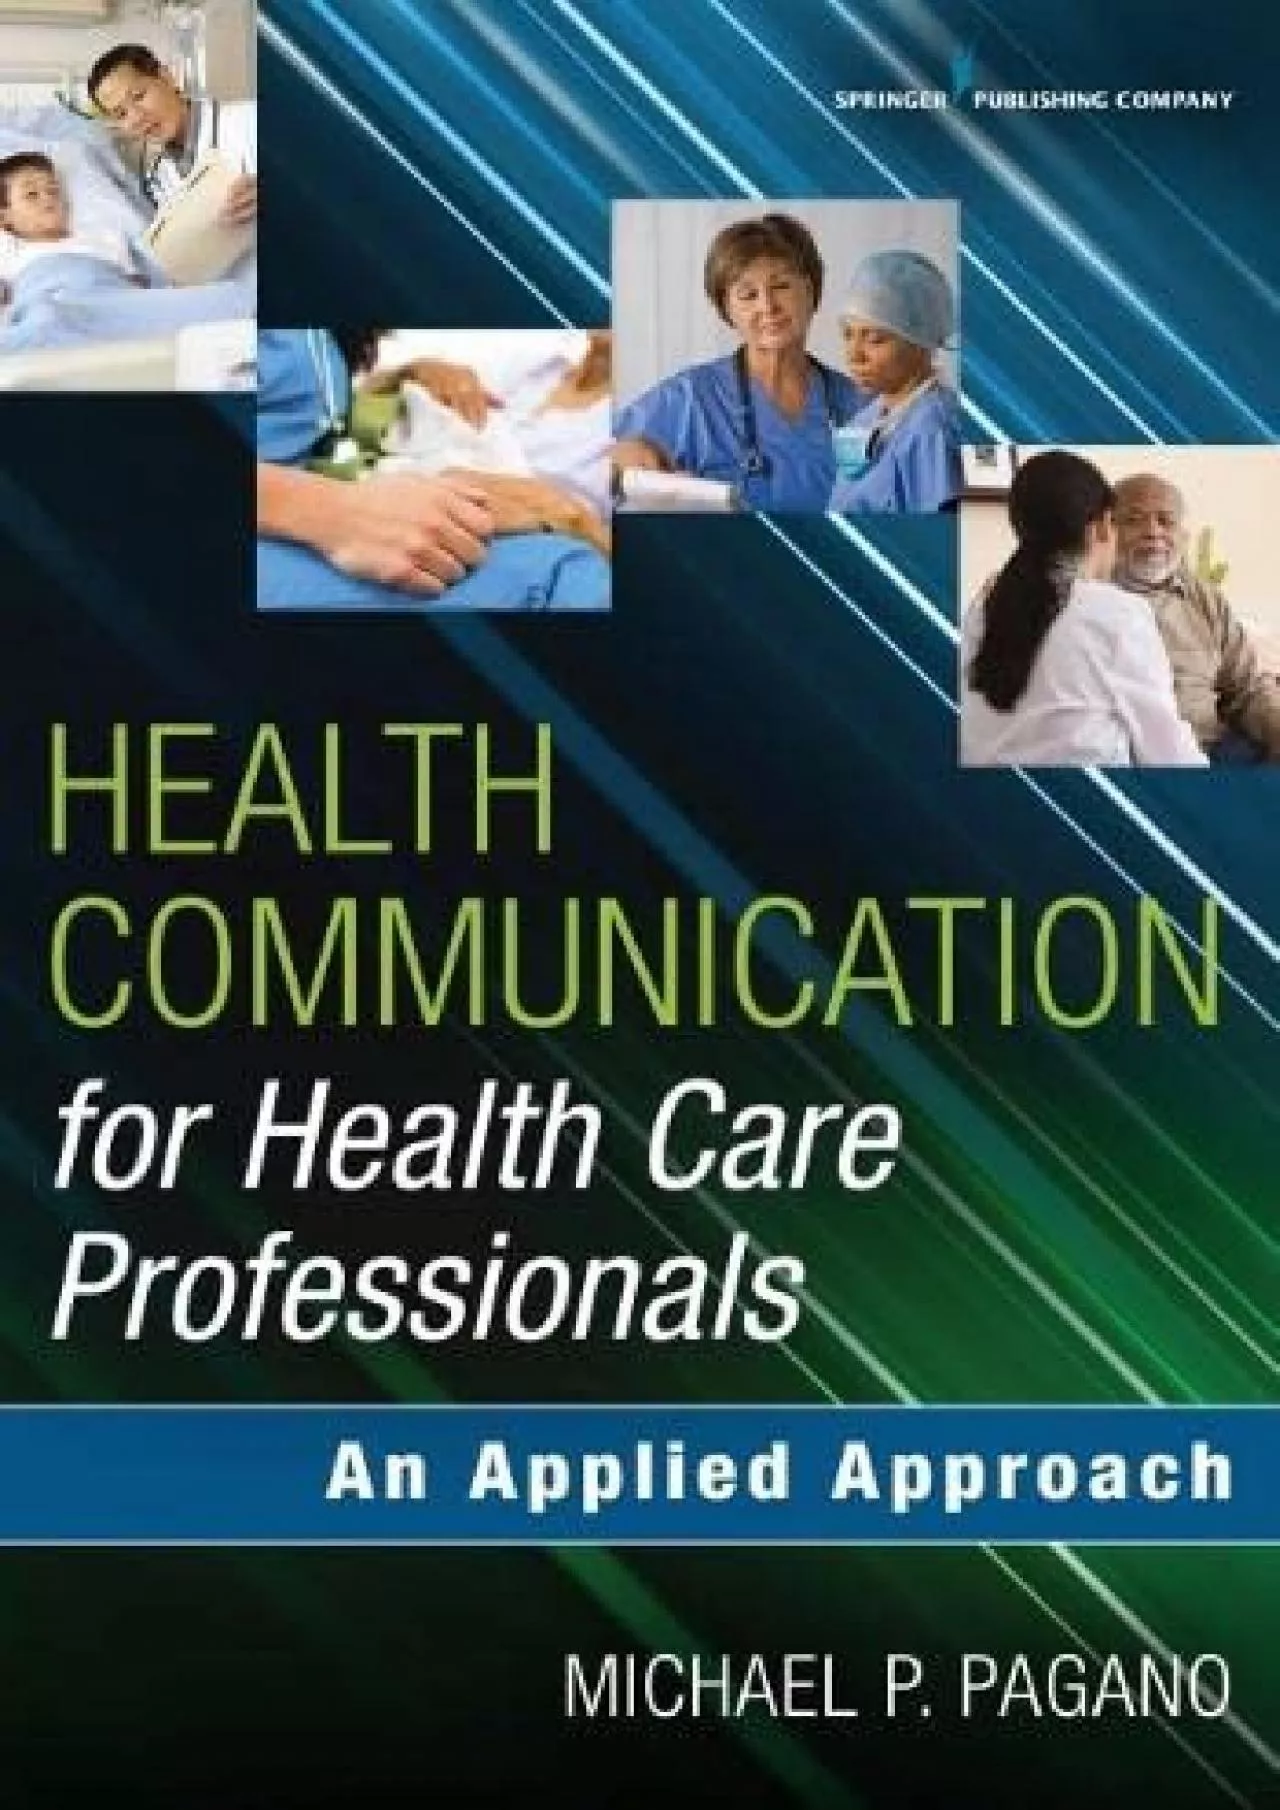 (BOOS)-Health Communication for Health Care Professionals: An Applied Approach